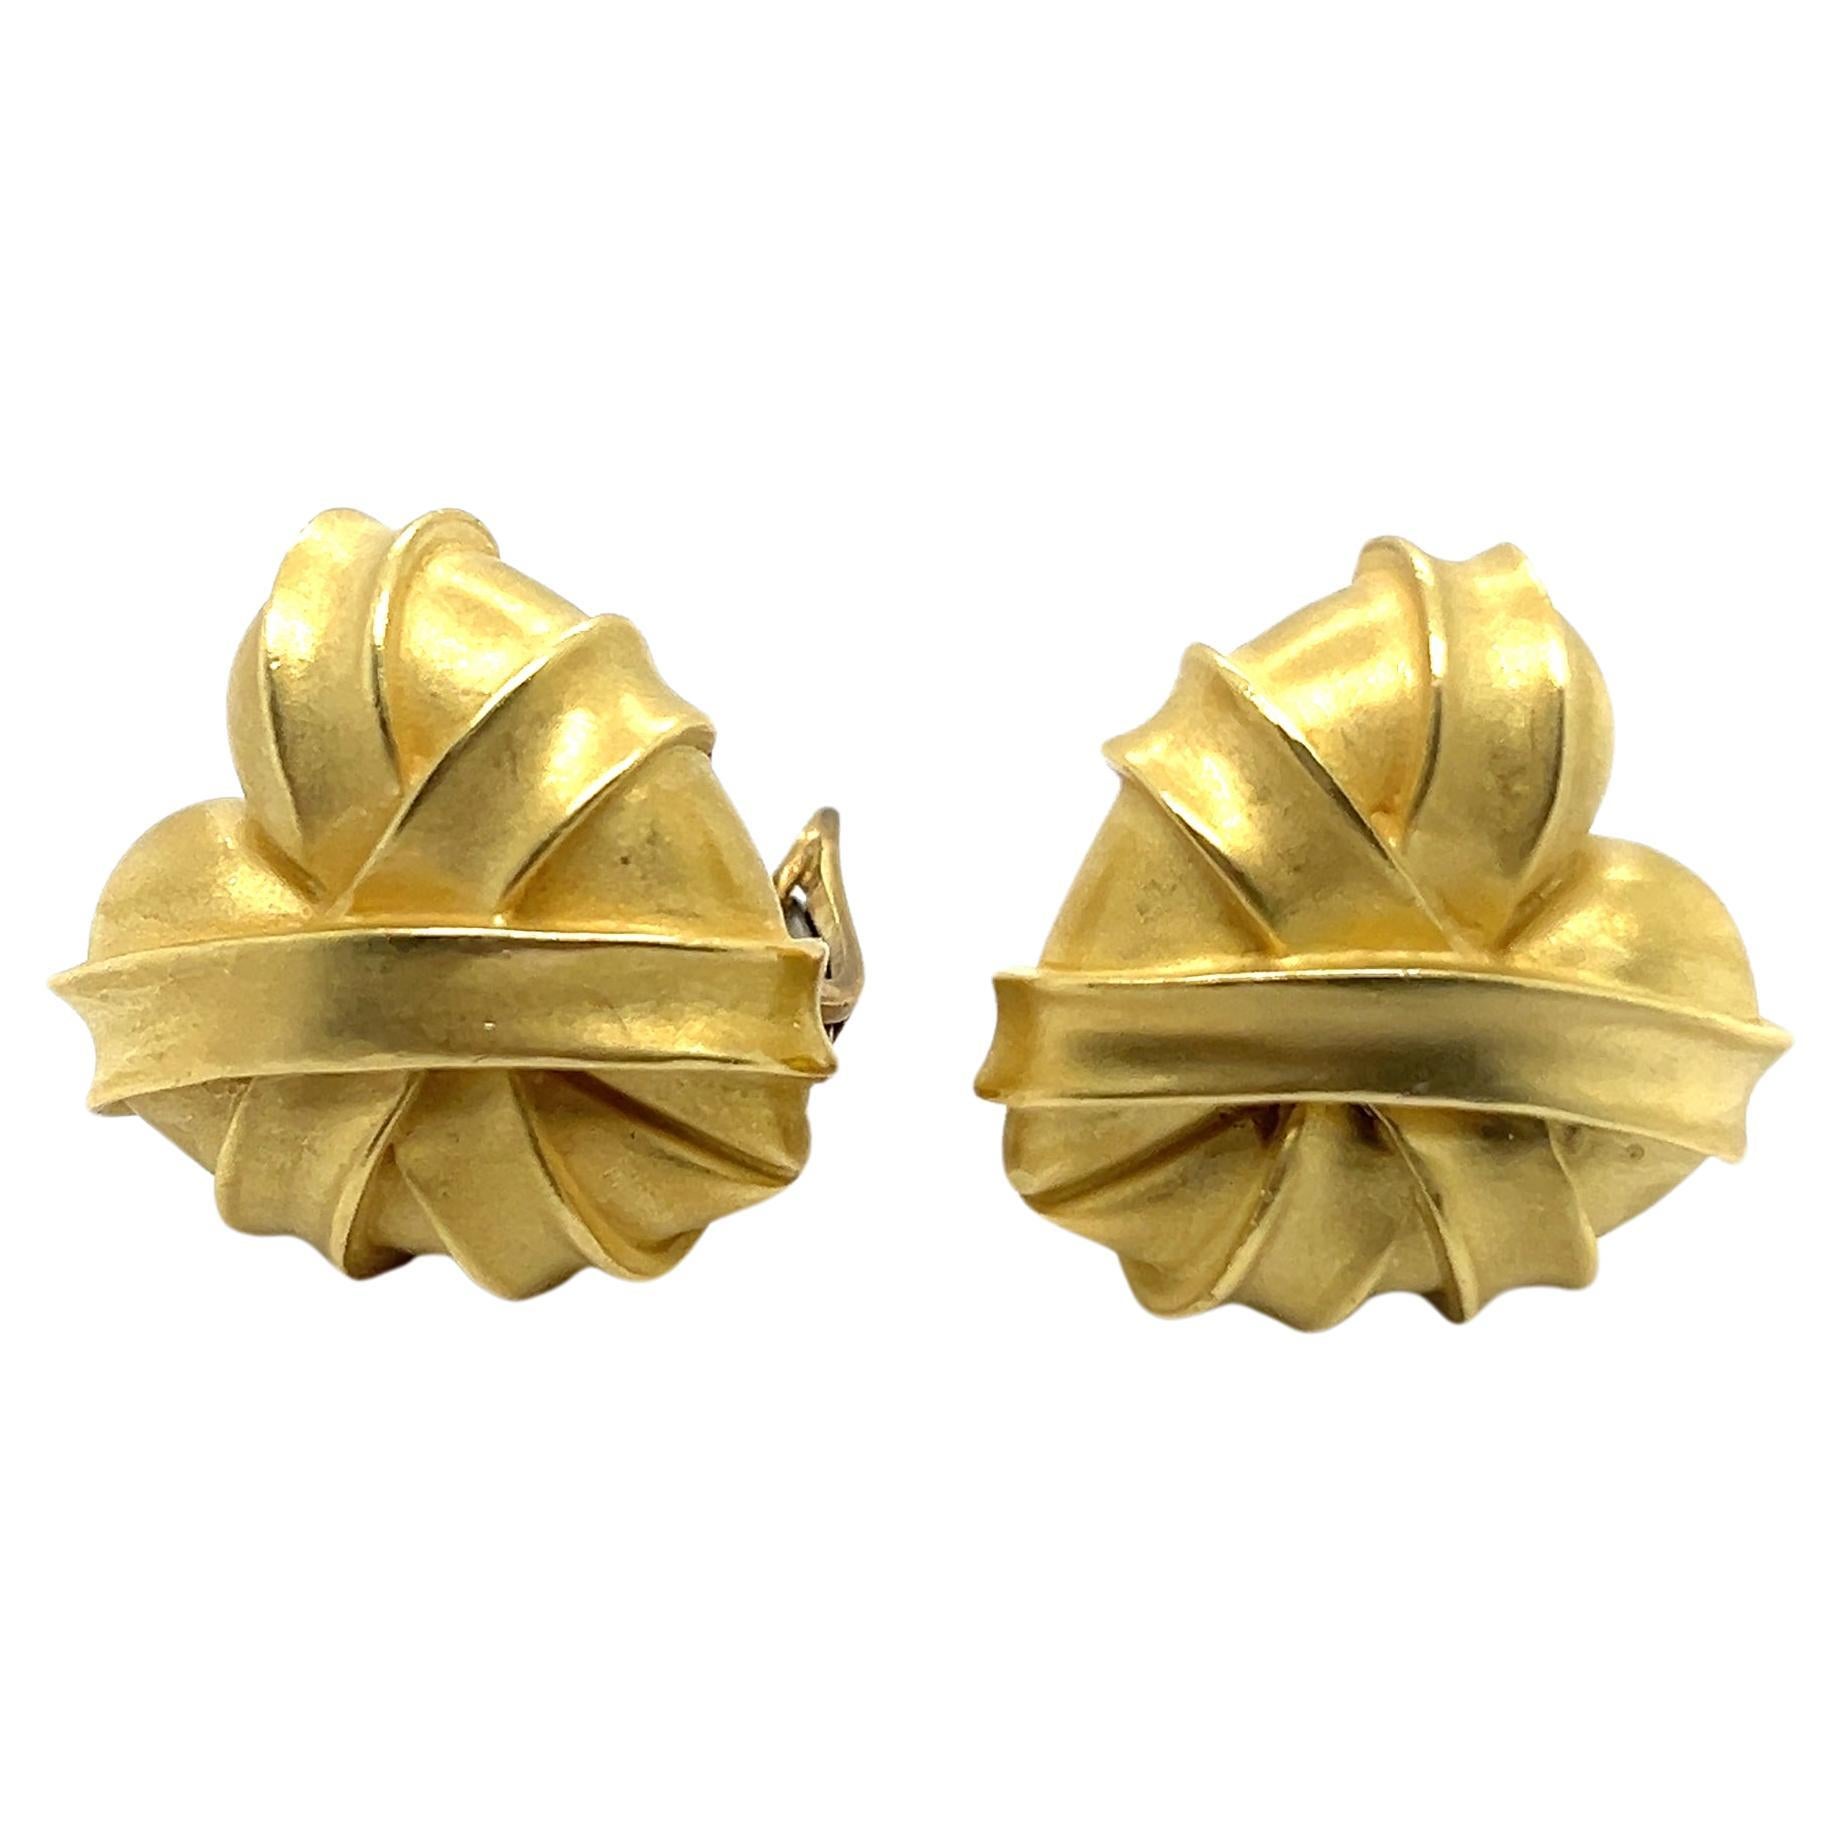 Discover the elegance of these heart-shaped earrings, also known as the 'St. Barts Heart,' created by the famous American jeweler Kieselstein-Cord.

Crafted in 18 Karat yellow gold with a matte effect, this piece features a ribbon-like design. With